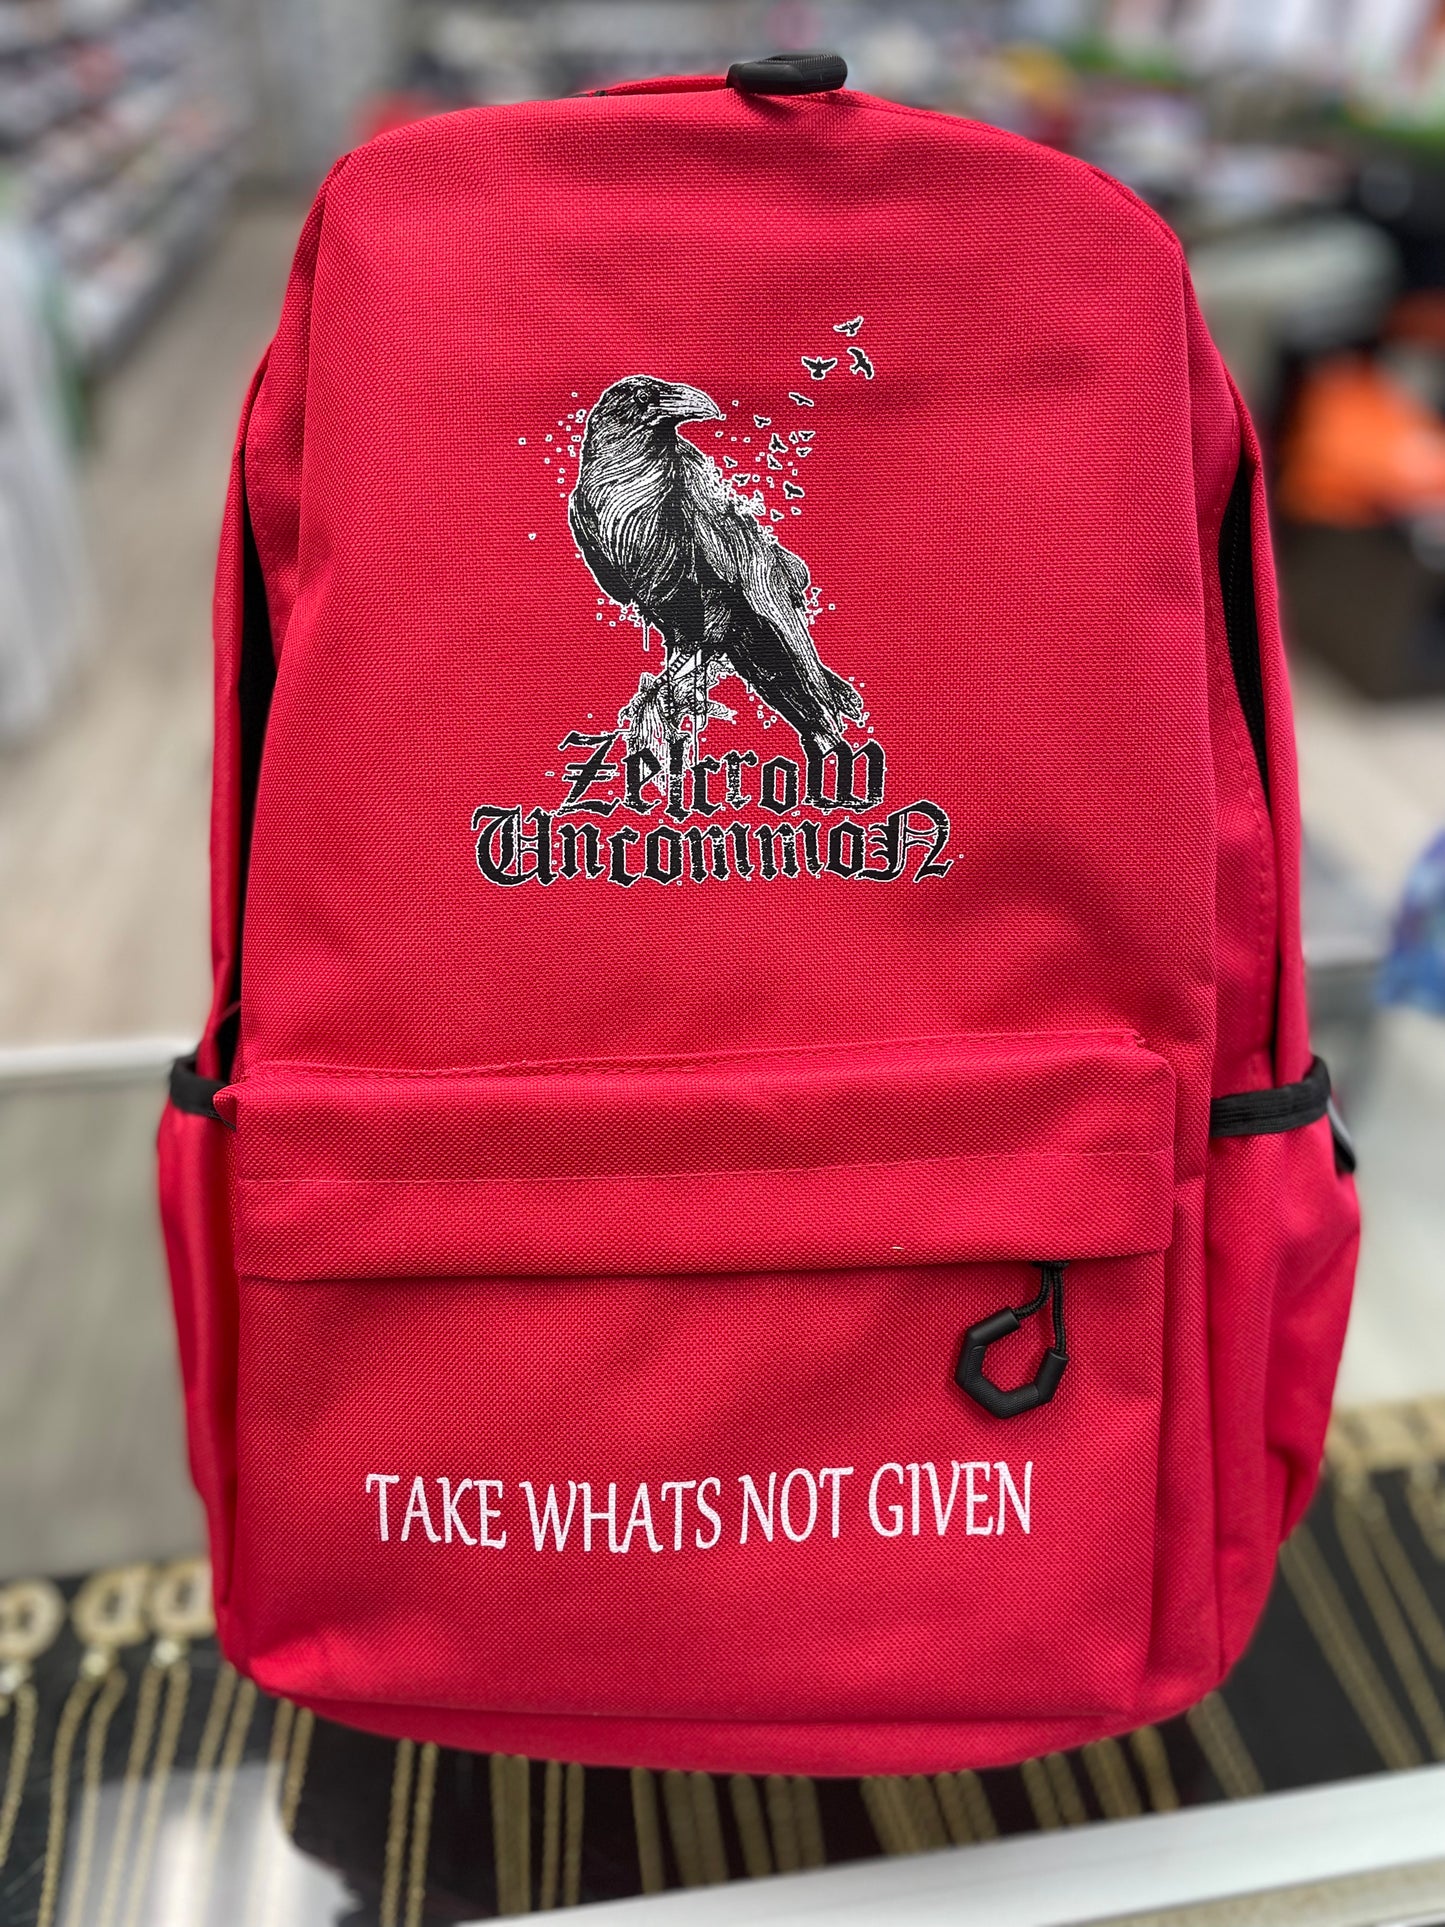 Zelcrow Uncommon "Take Whats Not Given" Backpack (Red)